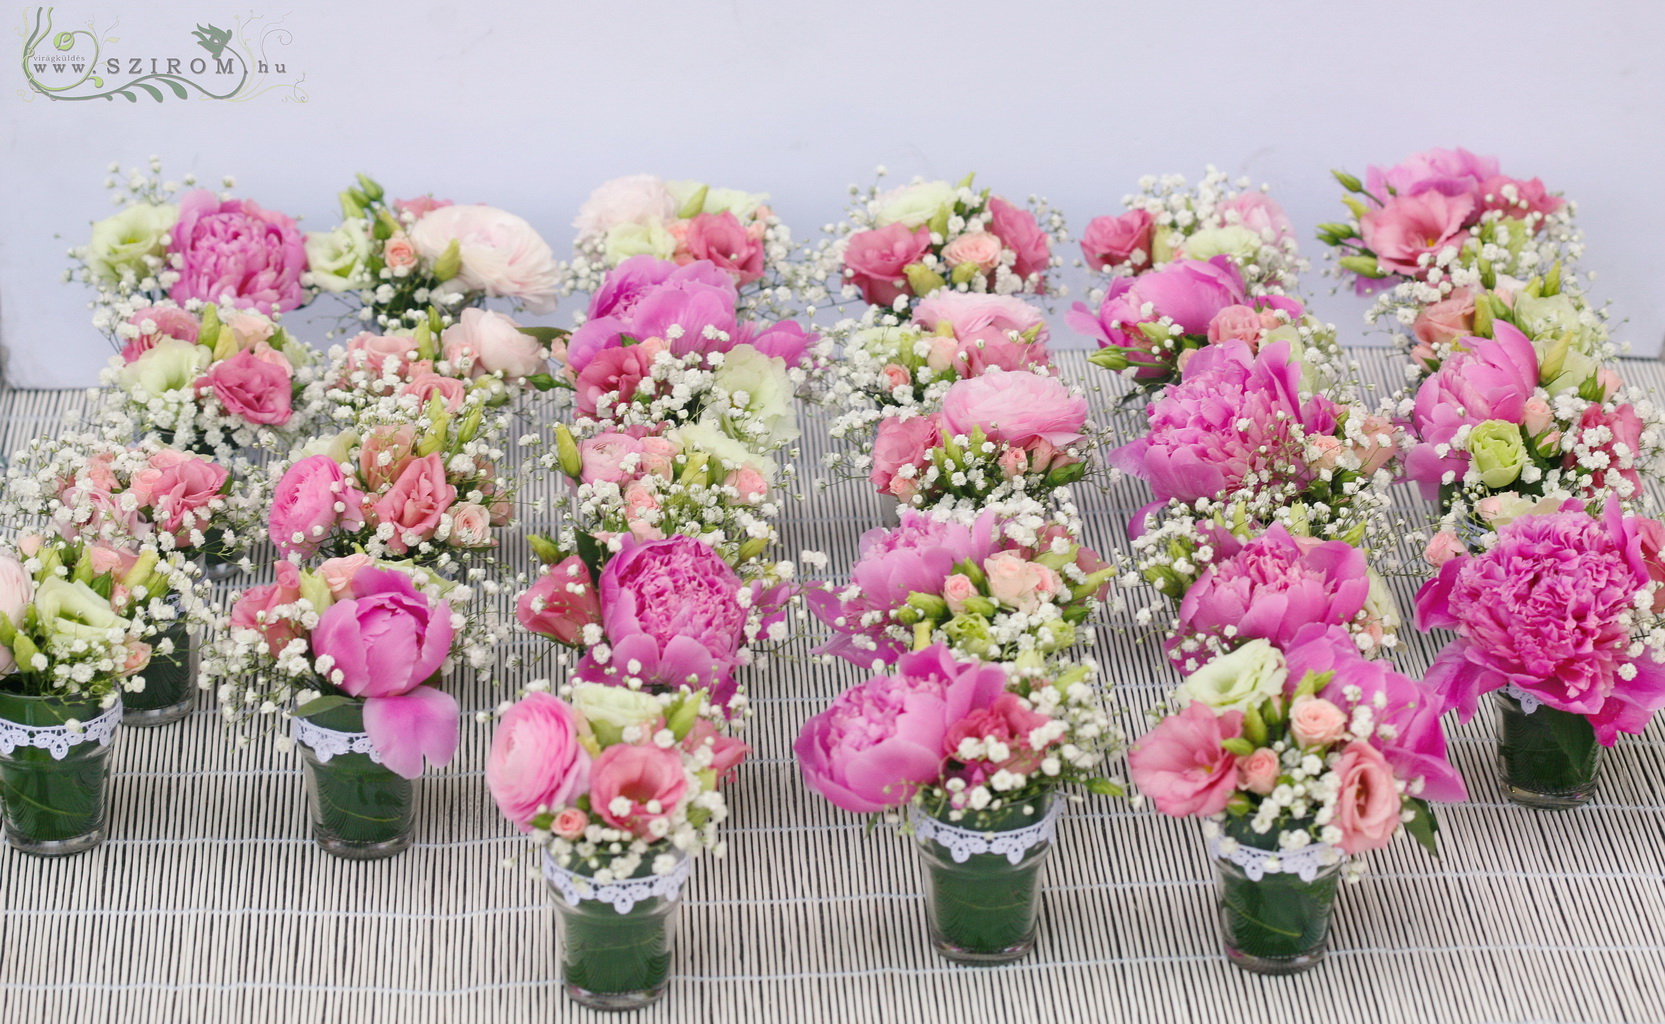 flower delivery Budapest - Centerpieces in cups with pink peonyes,  Hemingway Budapest, wedding